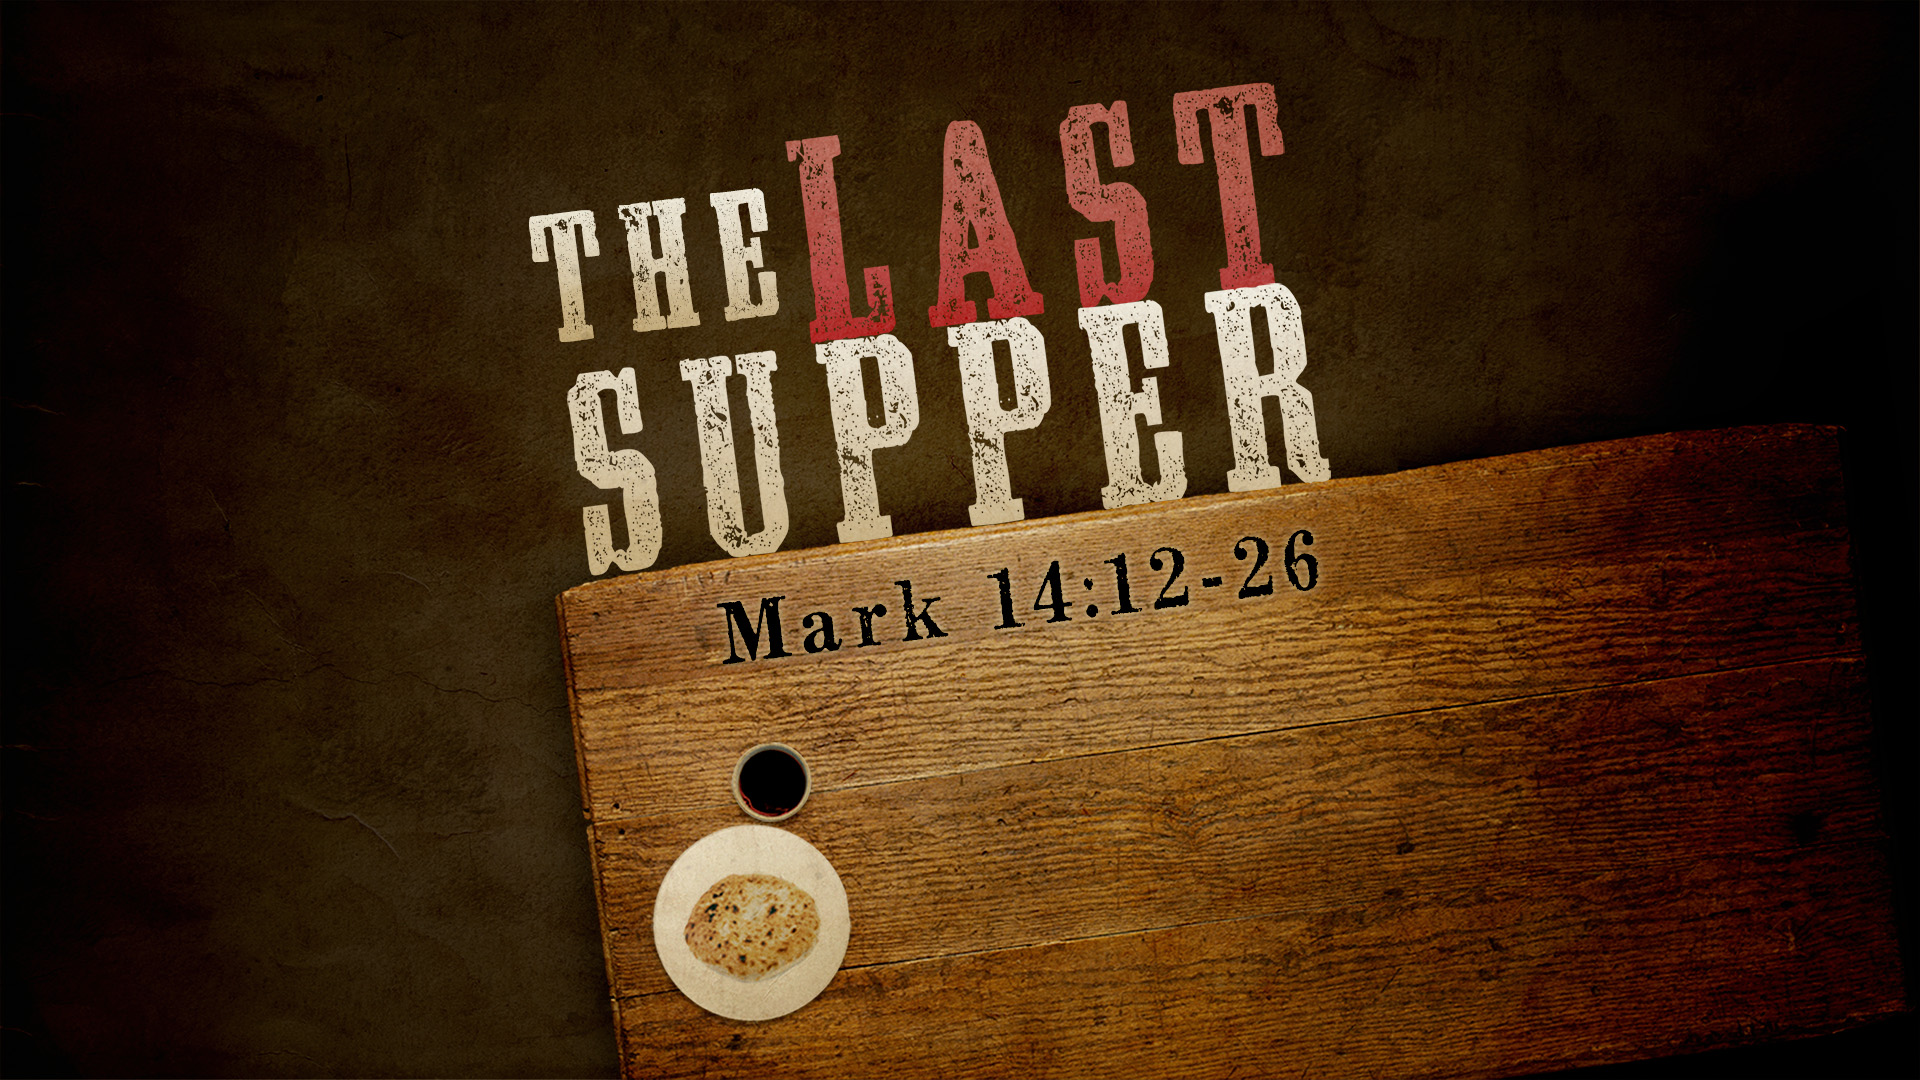 The Last Supper: A Fulfilling Meal